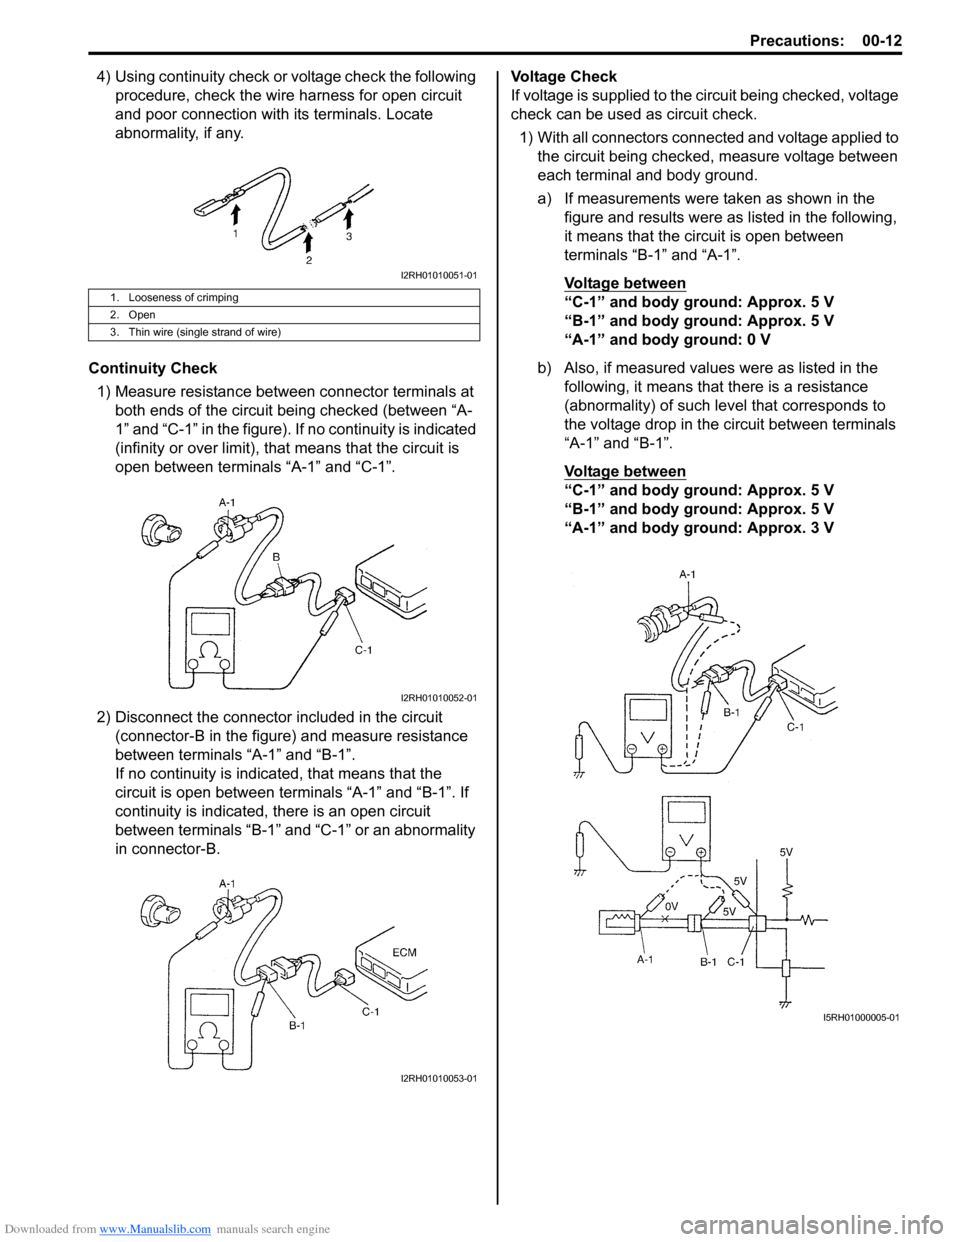 SUZUKI SWIFT 2005 2.G Service Workshop Manual Downloaded from www.Manualslib.com manuals search engine Precautions: 00-12
4) Using continuity check or voltage check the following procedure, check the wire harness for open circuit 
and poor connec